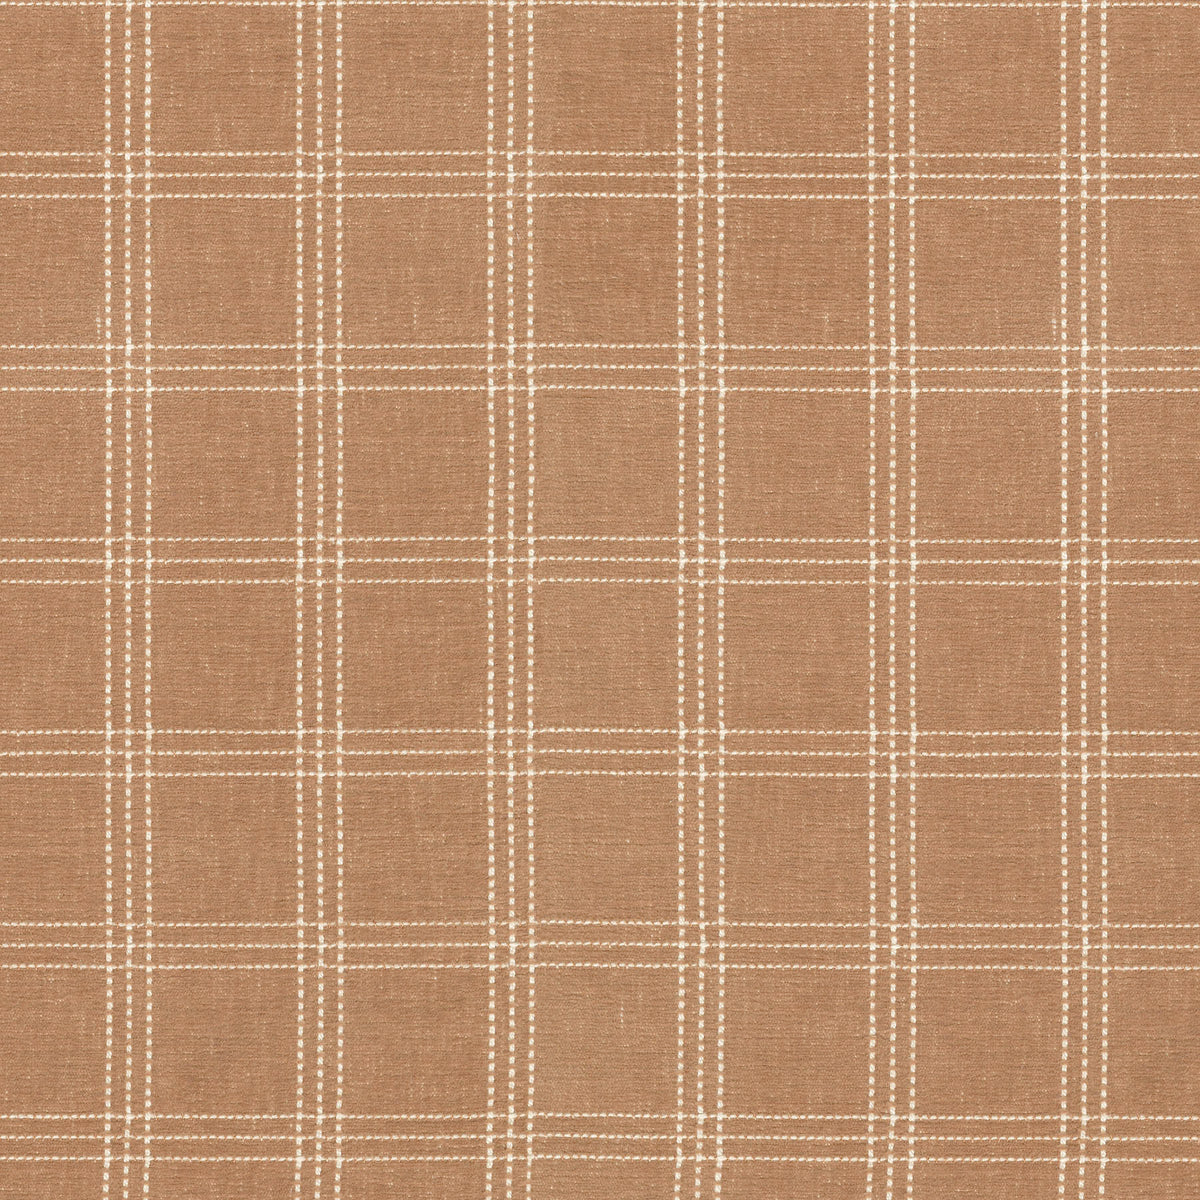 P/K Lifestyles Catalina Check -  Clay 470615 Upholstery Fabric